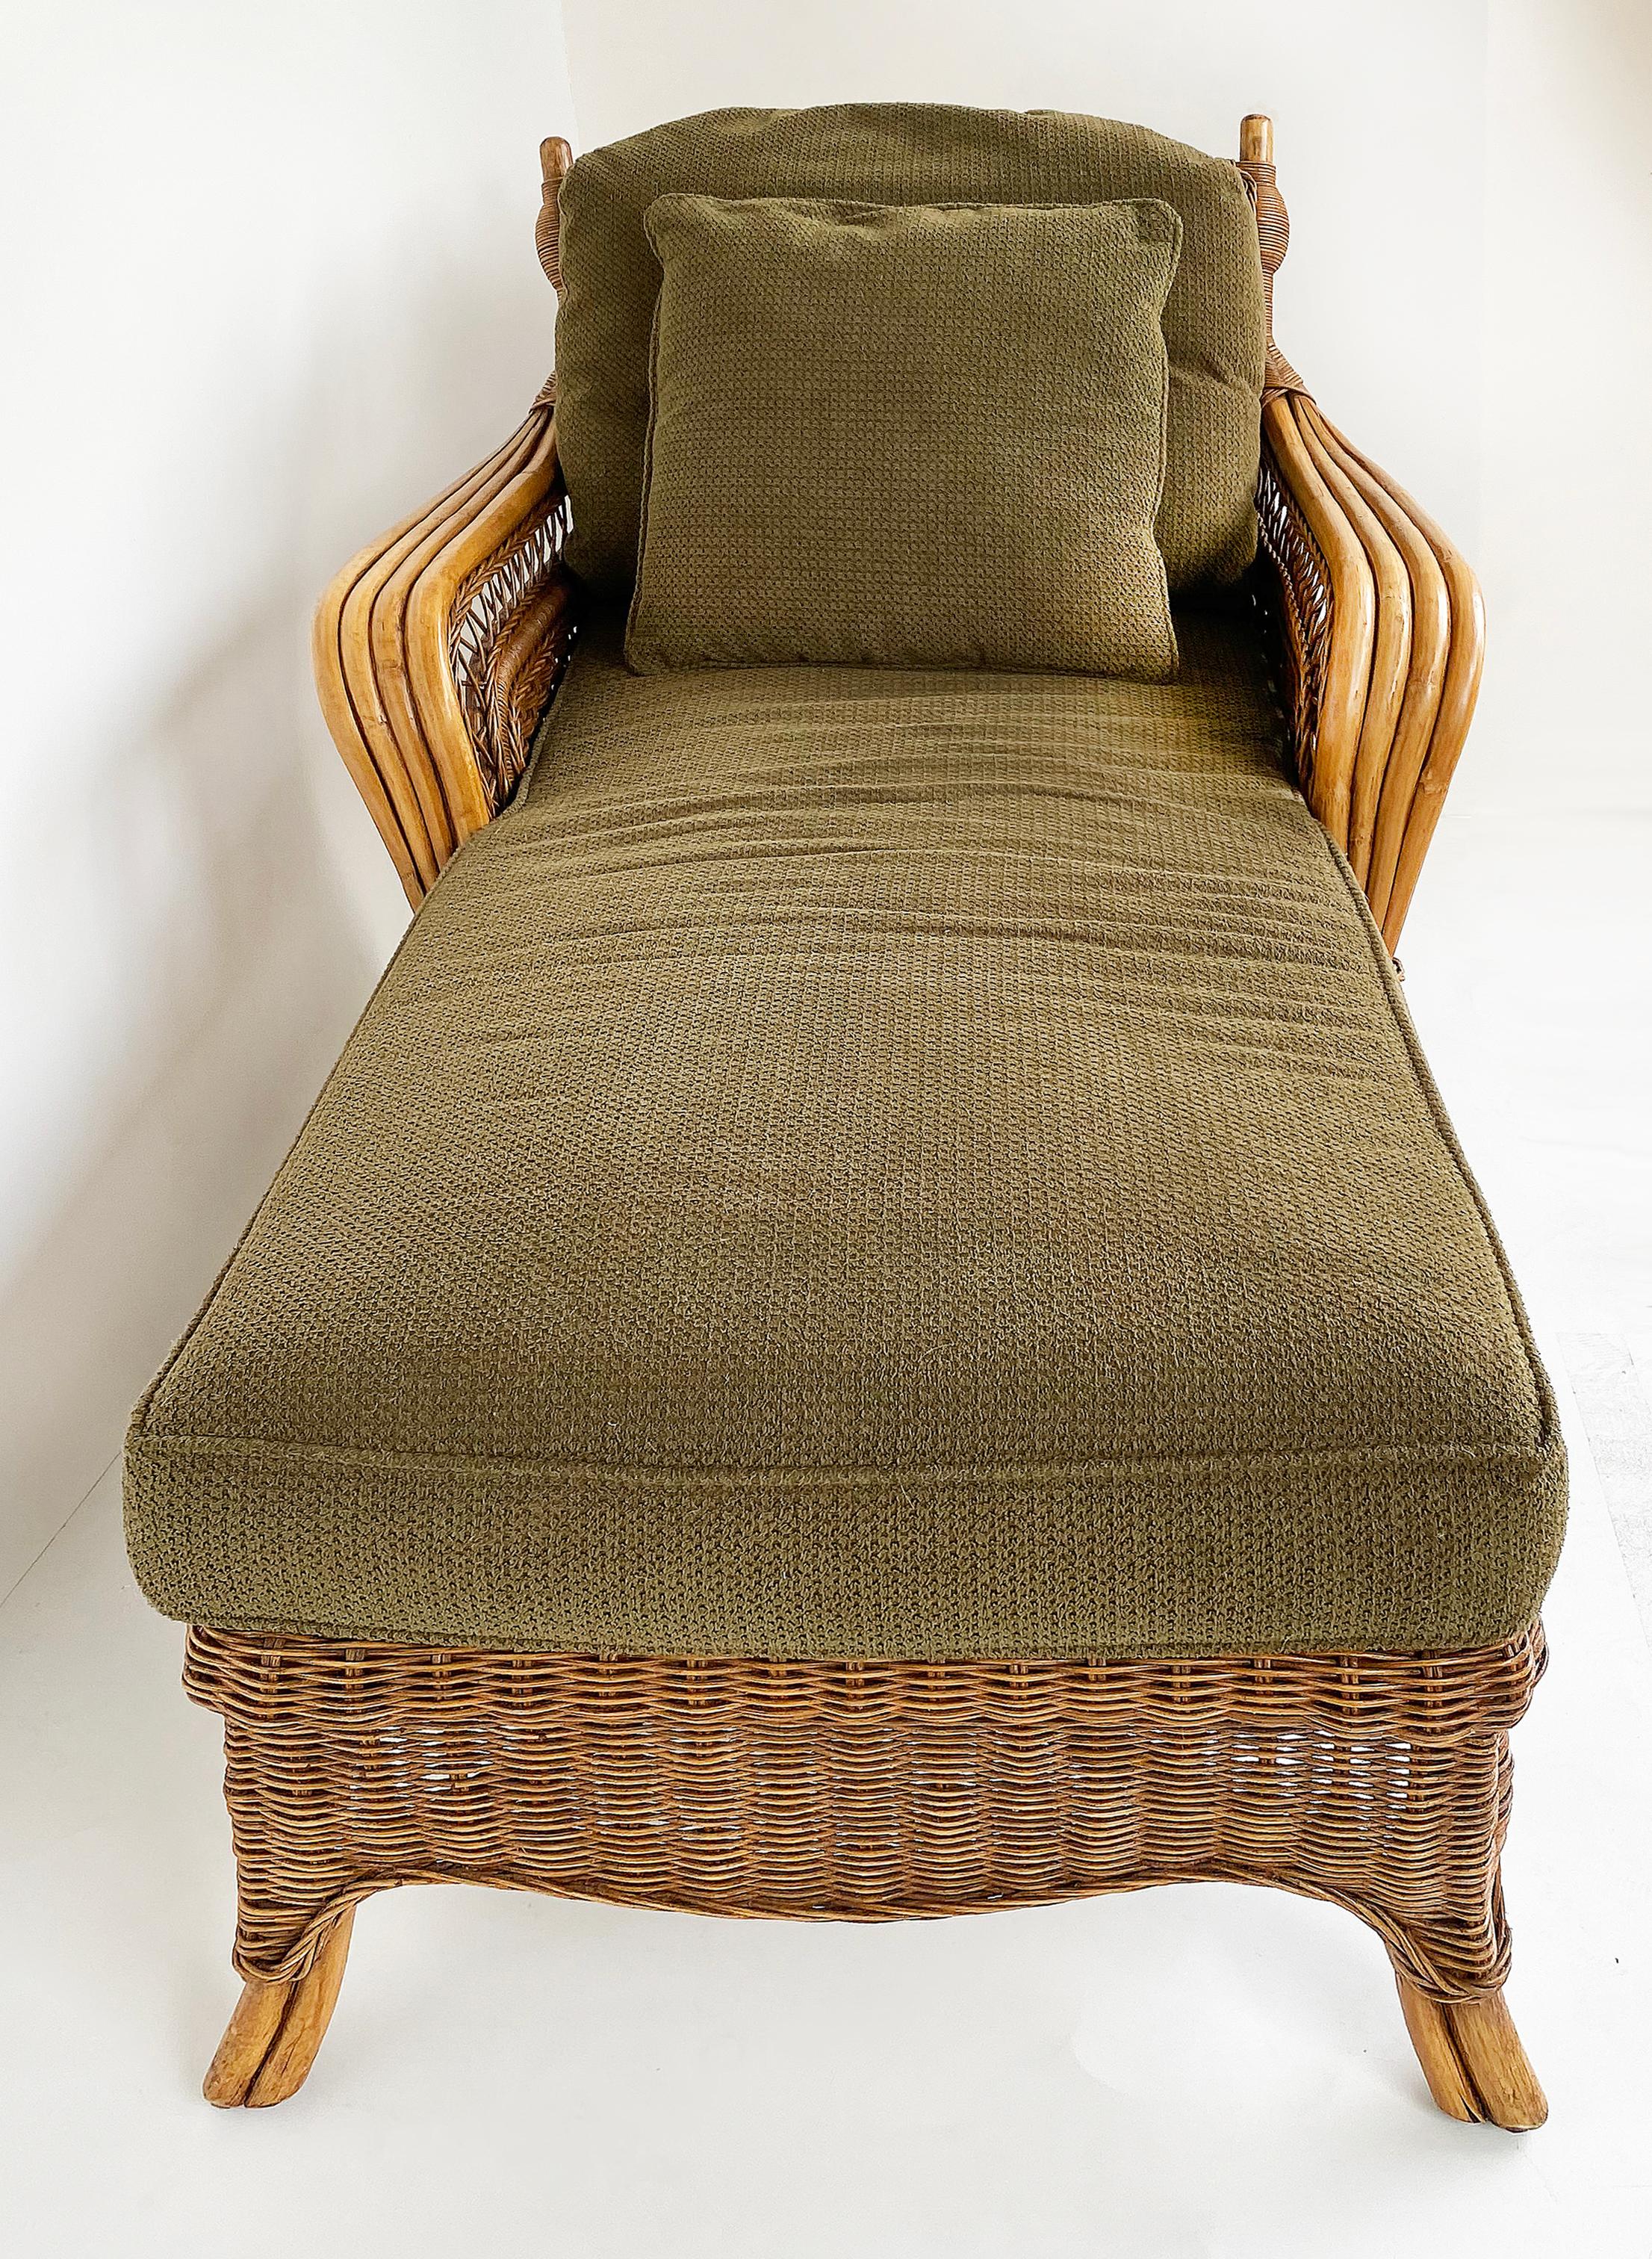 American Rattan Chaise Lounge with Upholstered Seat by Braxton Culler, USA